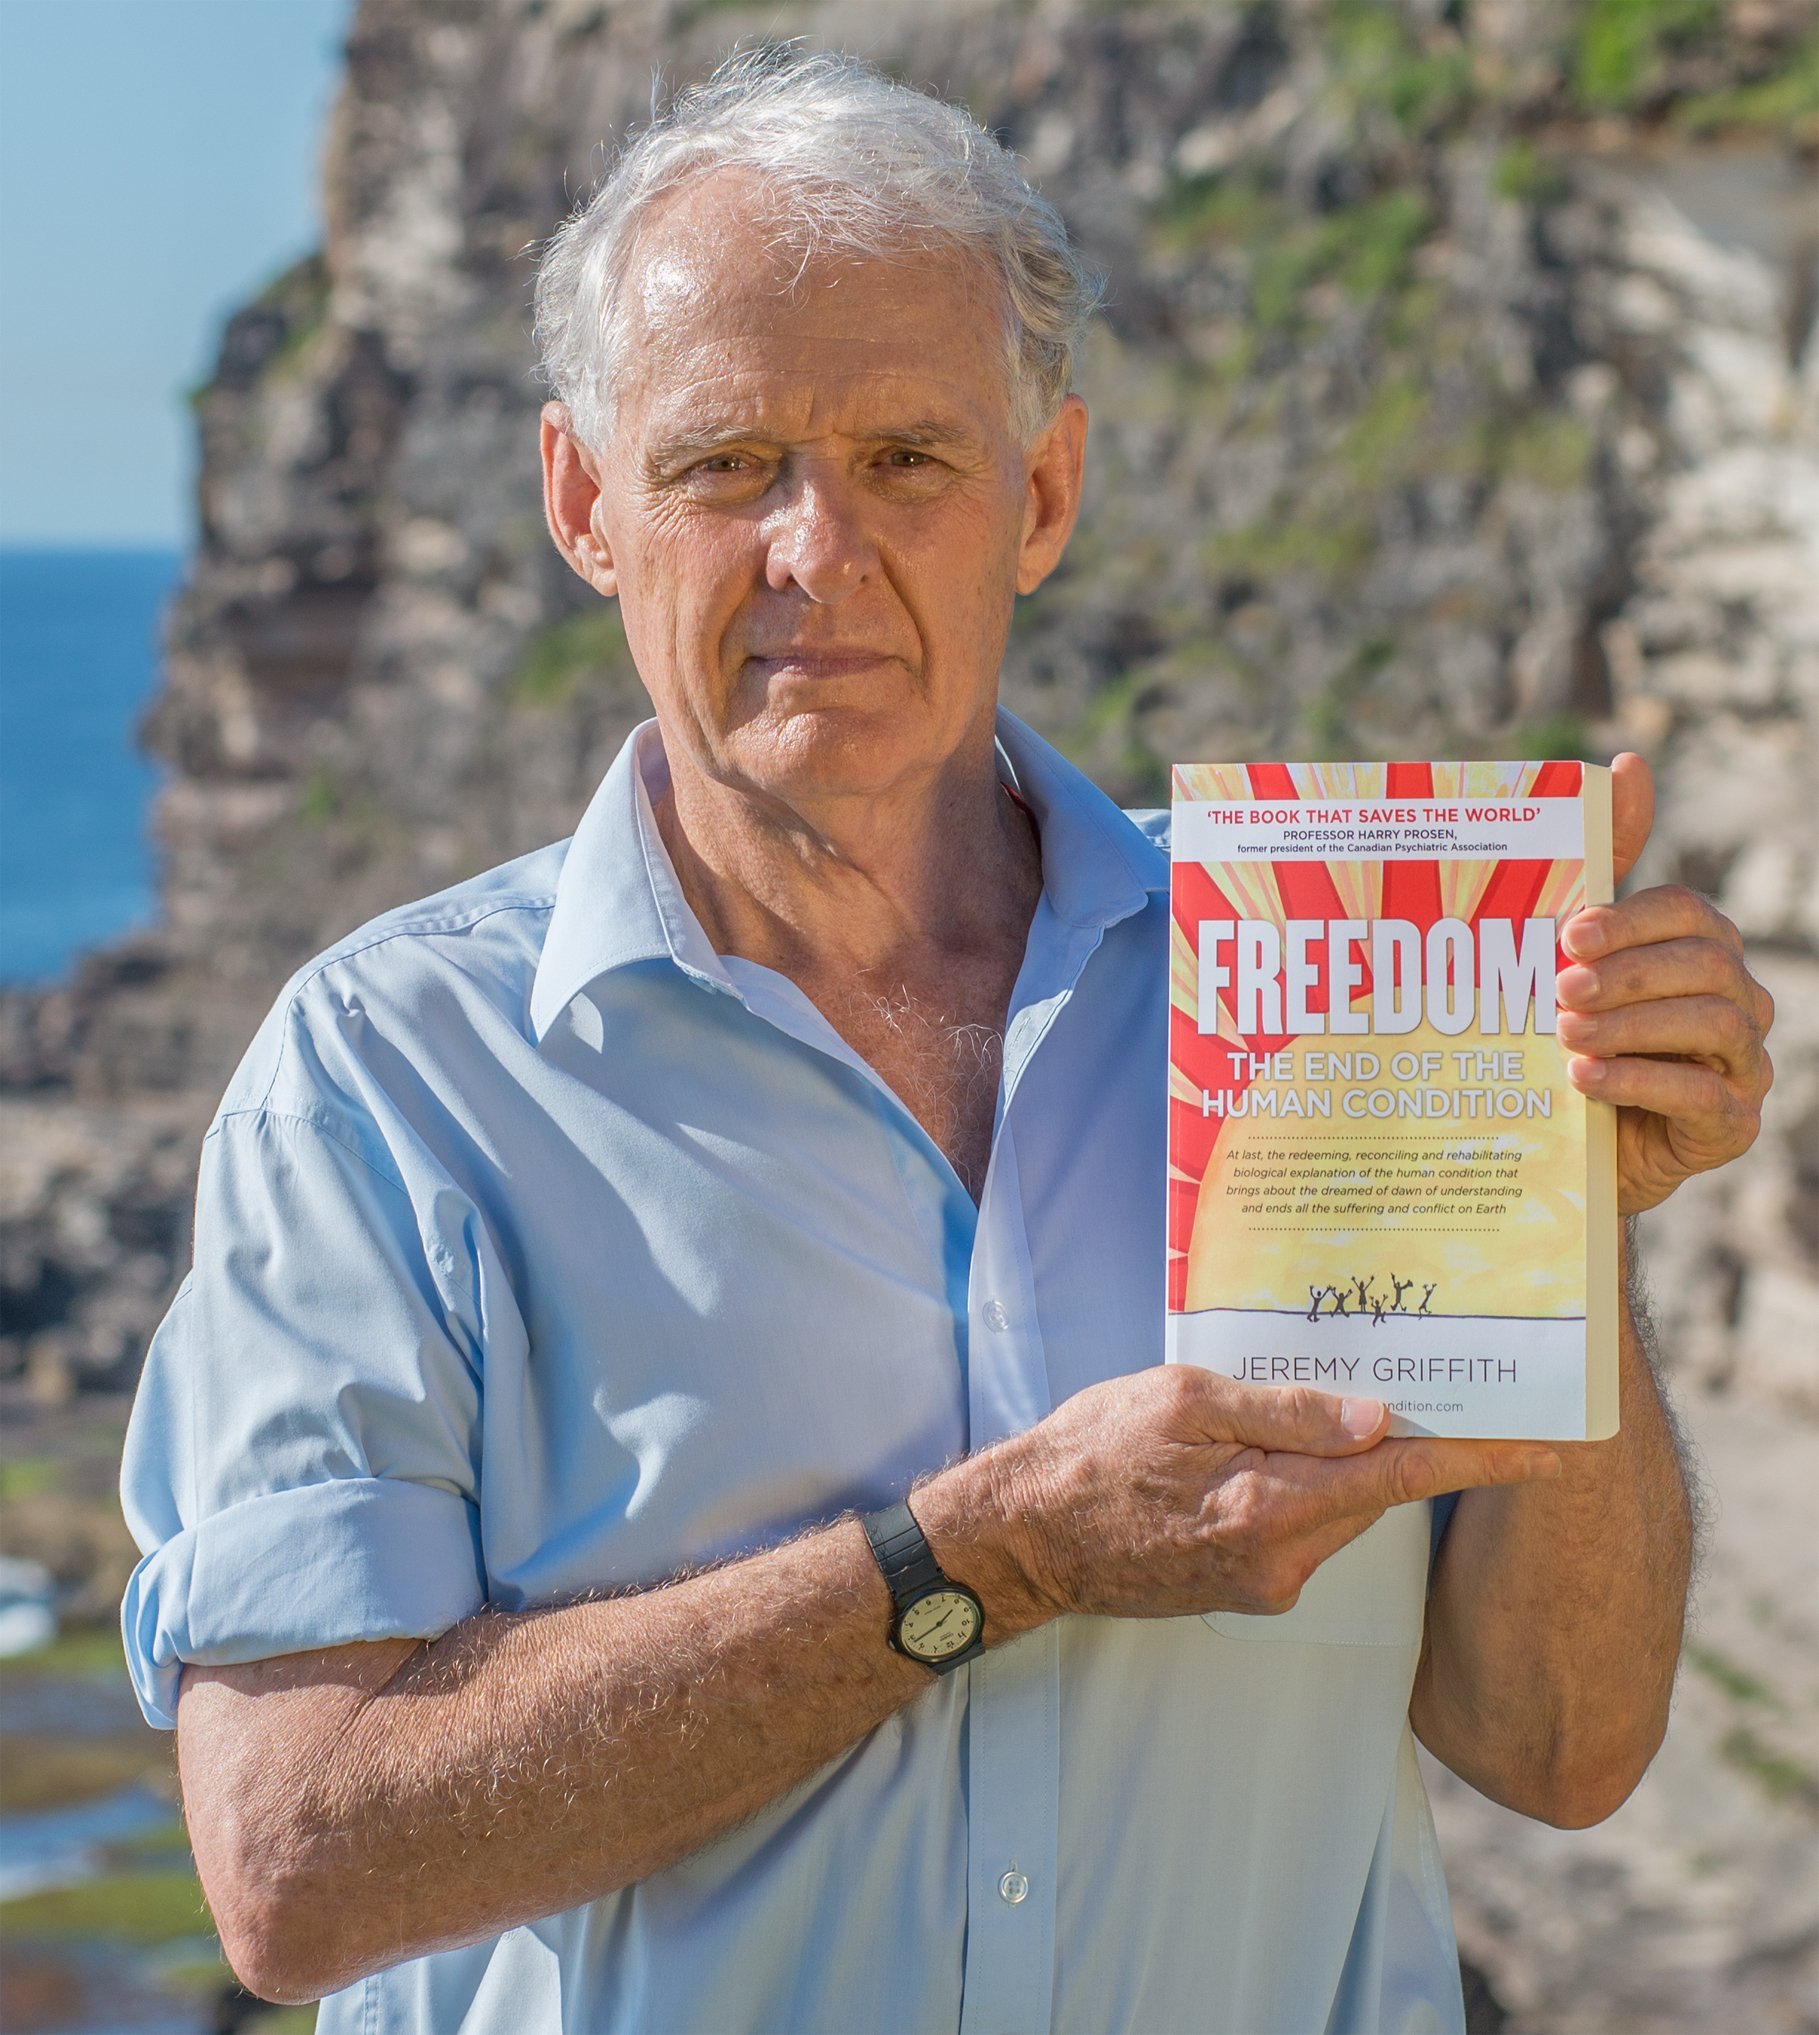 Biologist & author Jeremy Griffith with his main treatise on the human condition, 'FREEDOM: The End Of The Human Condition'